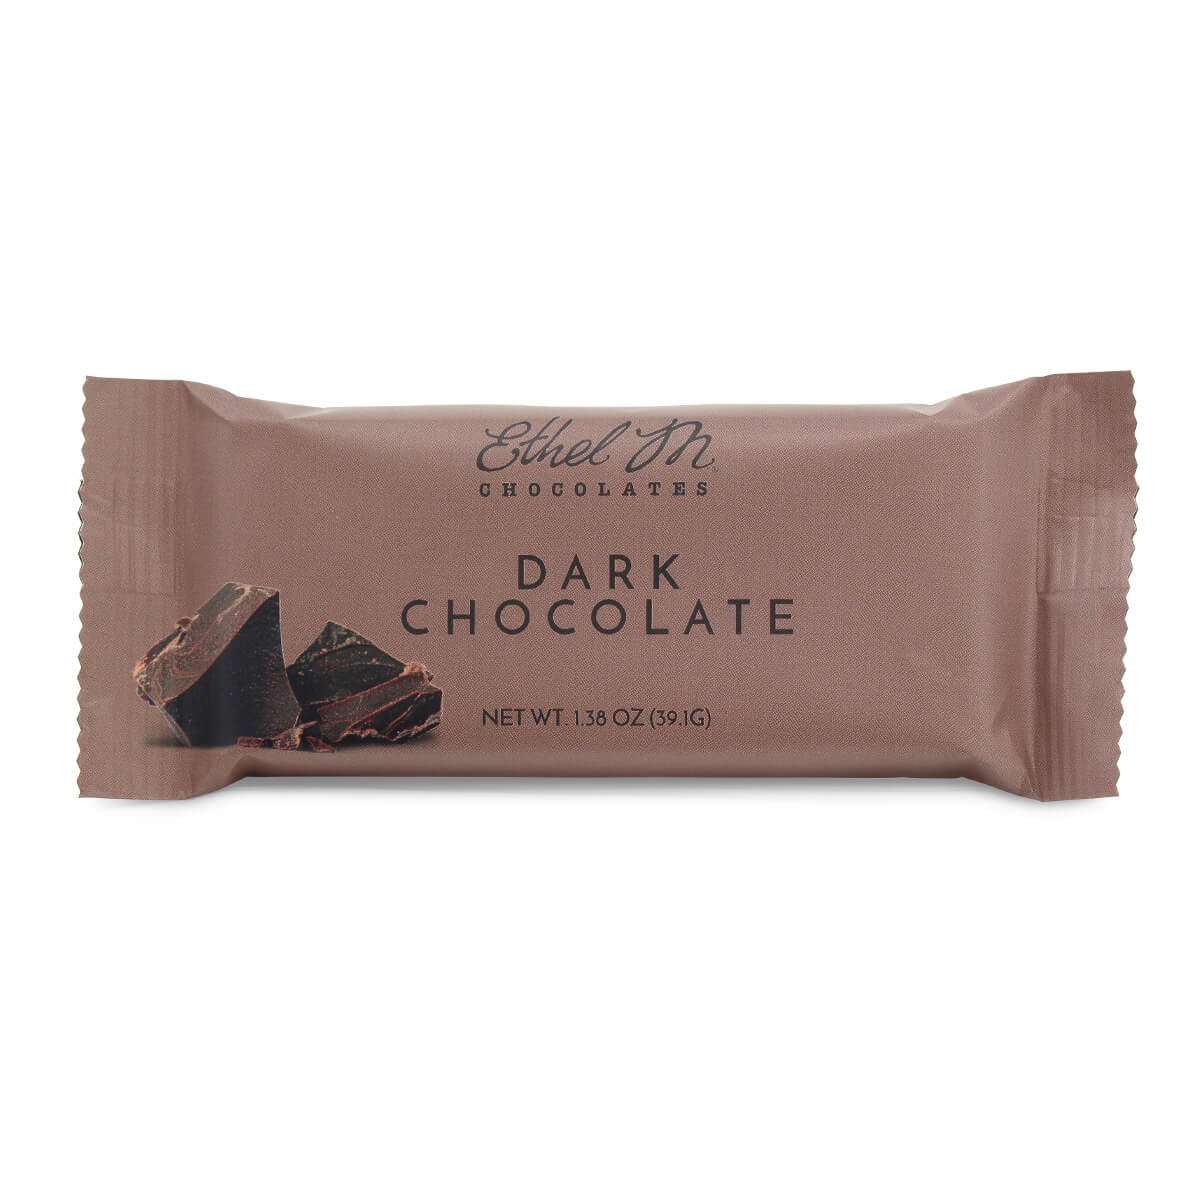 Sink your teeth into our very own Rich, Bittersweet, Premium Ethel M Chocolates  Dark Chocolate Bar.